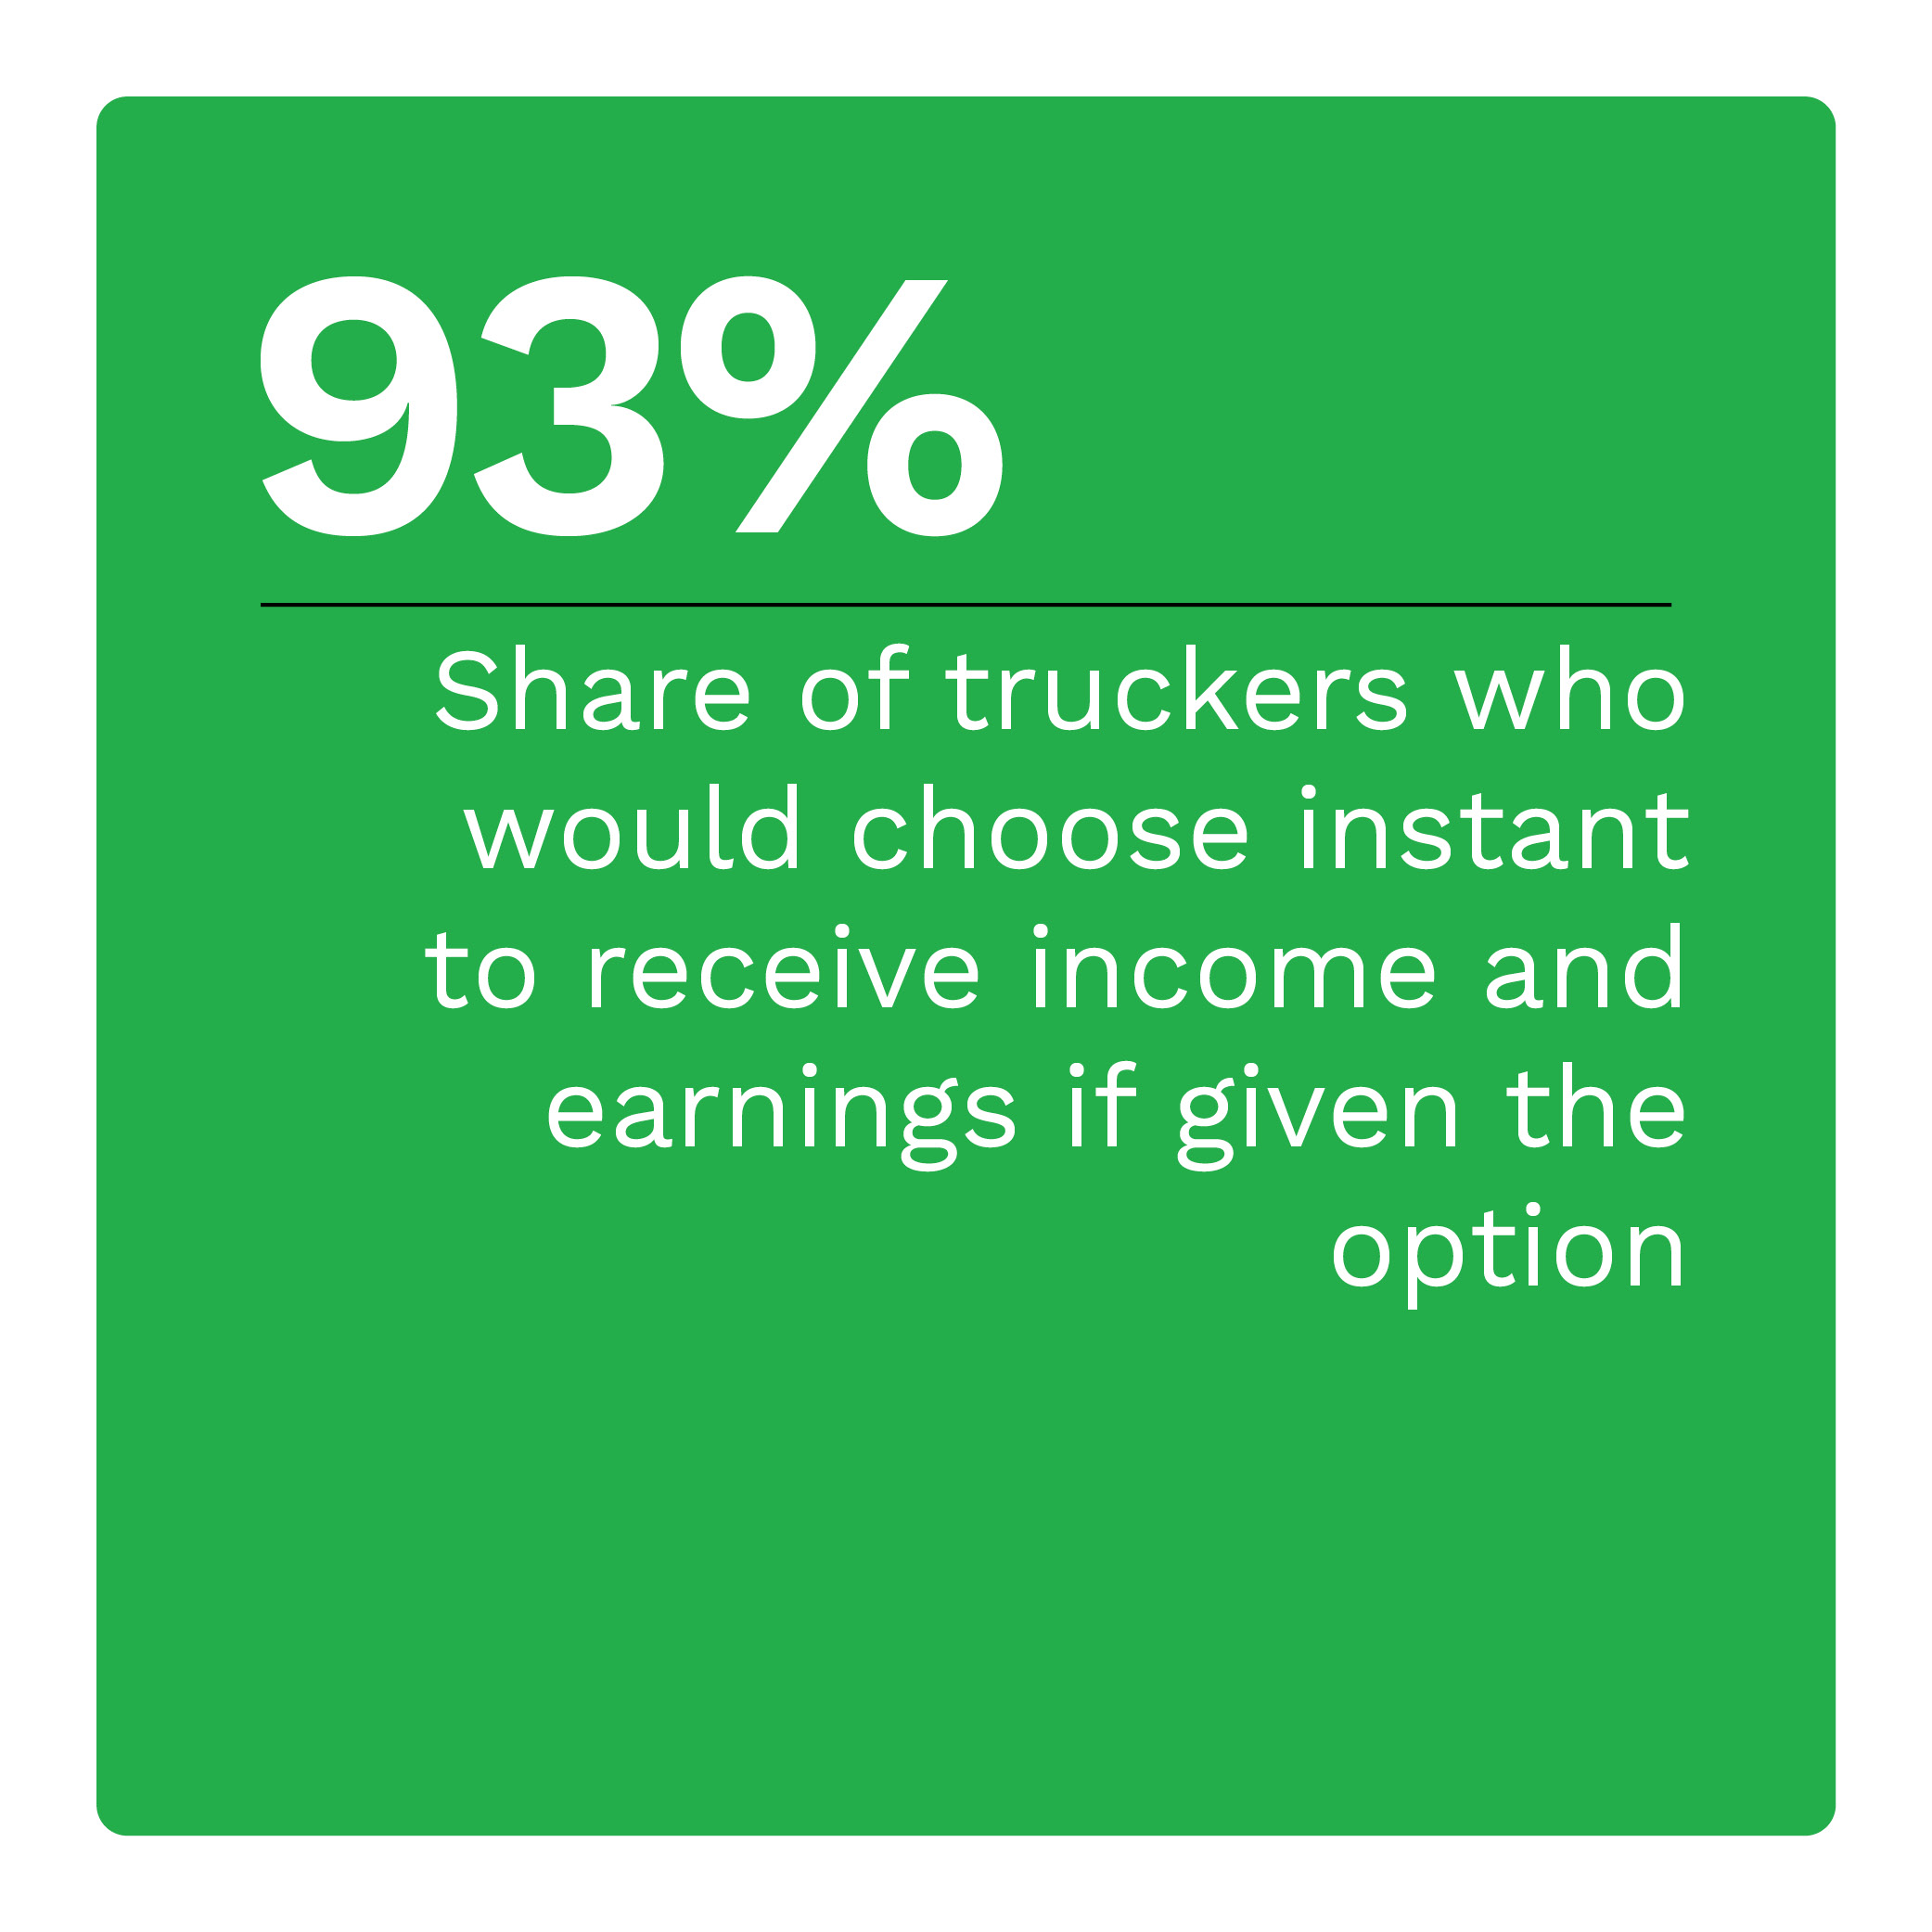 93%: Share of truckers who would choose instant to receive income and earnings if given the option